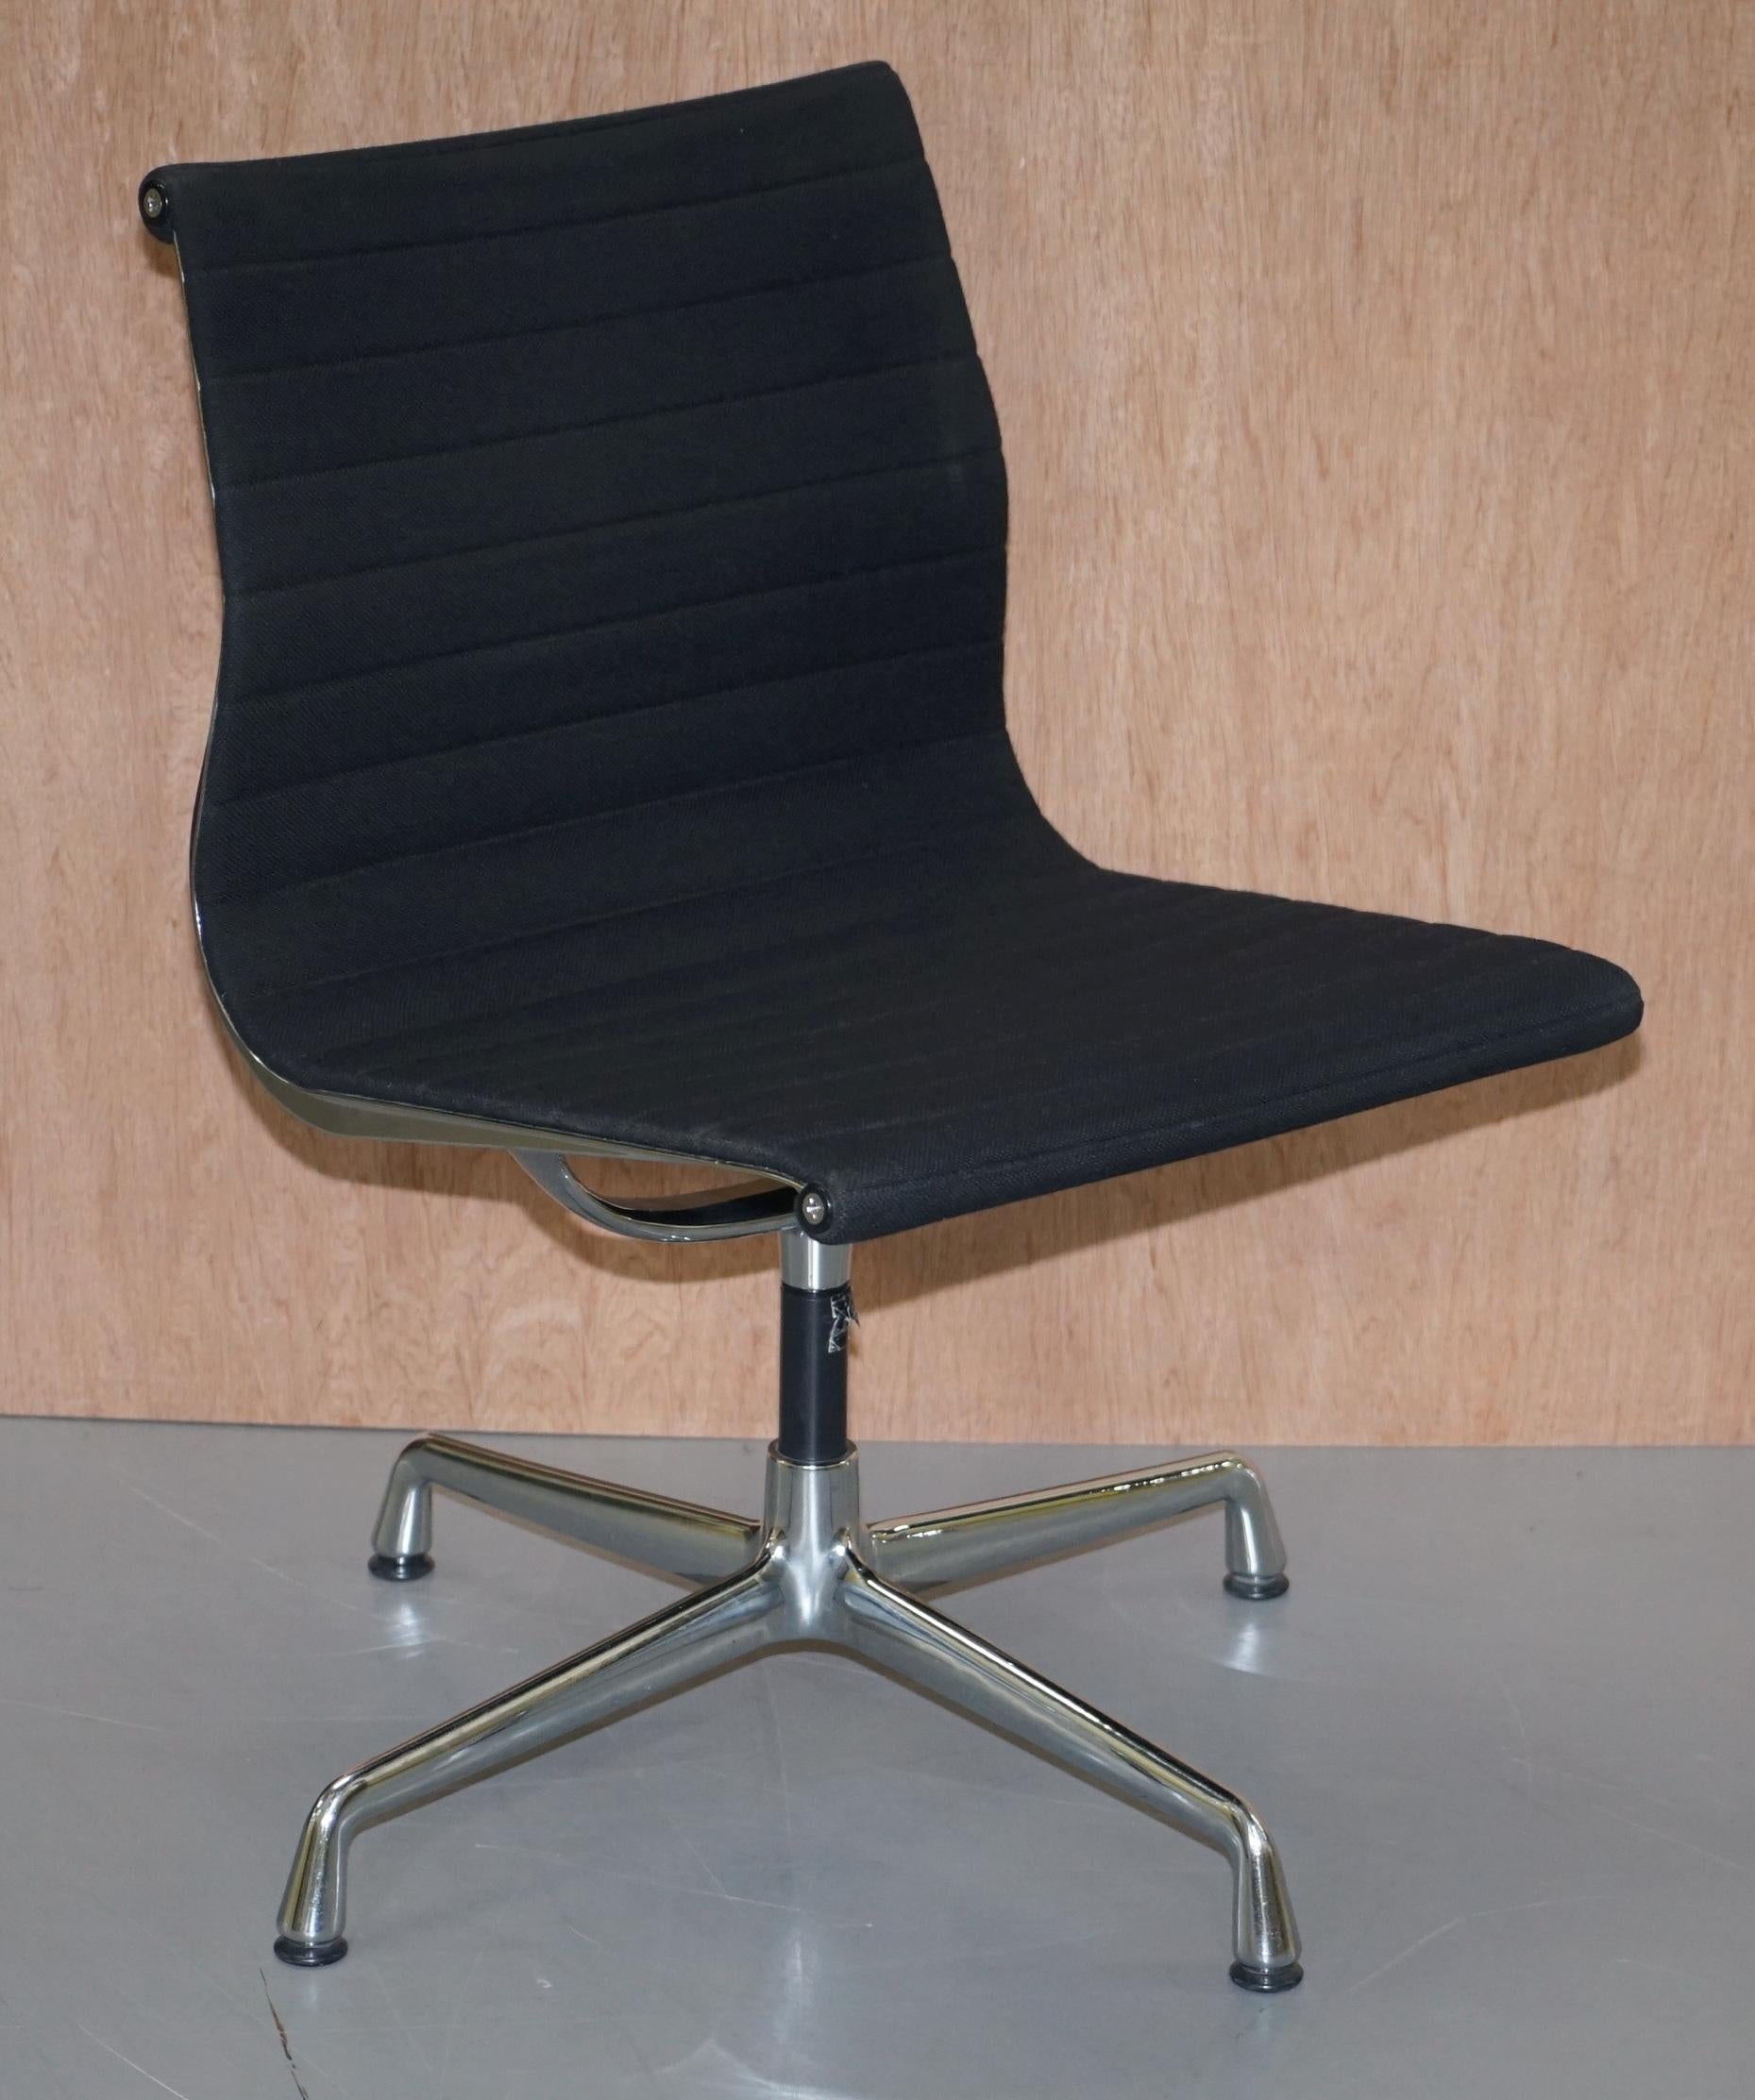 We are delighted to offer for sale one of two Vitra Eames EA 105 Hopsak office chairs RRP £1698 each

To confirm this sale is for one chair with the option to buy two

Charles and Ray Eames created an icon of the 20th century with their design